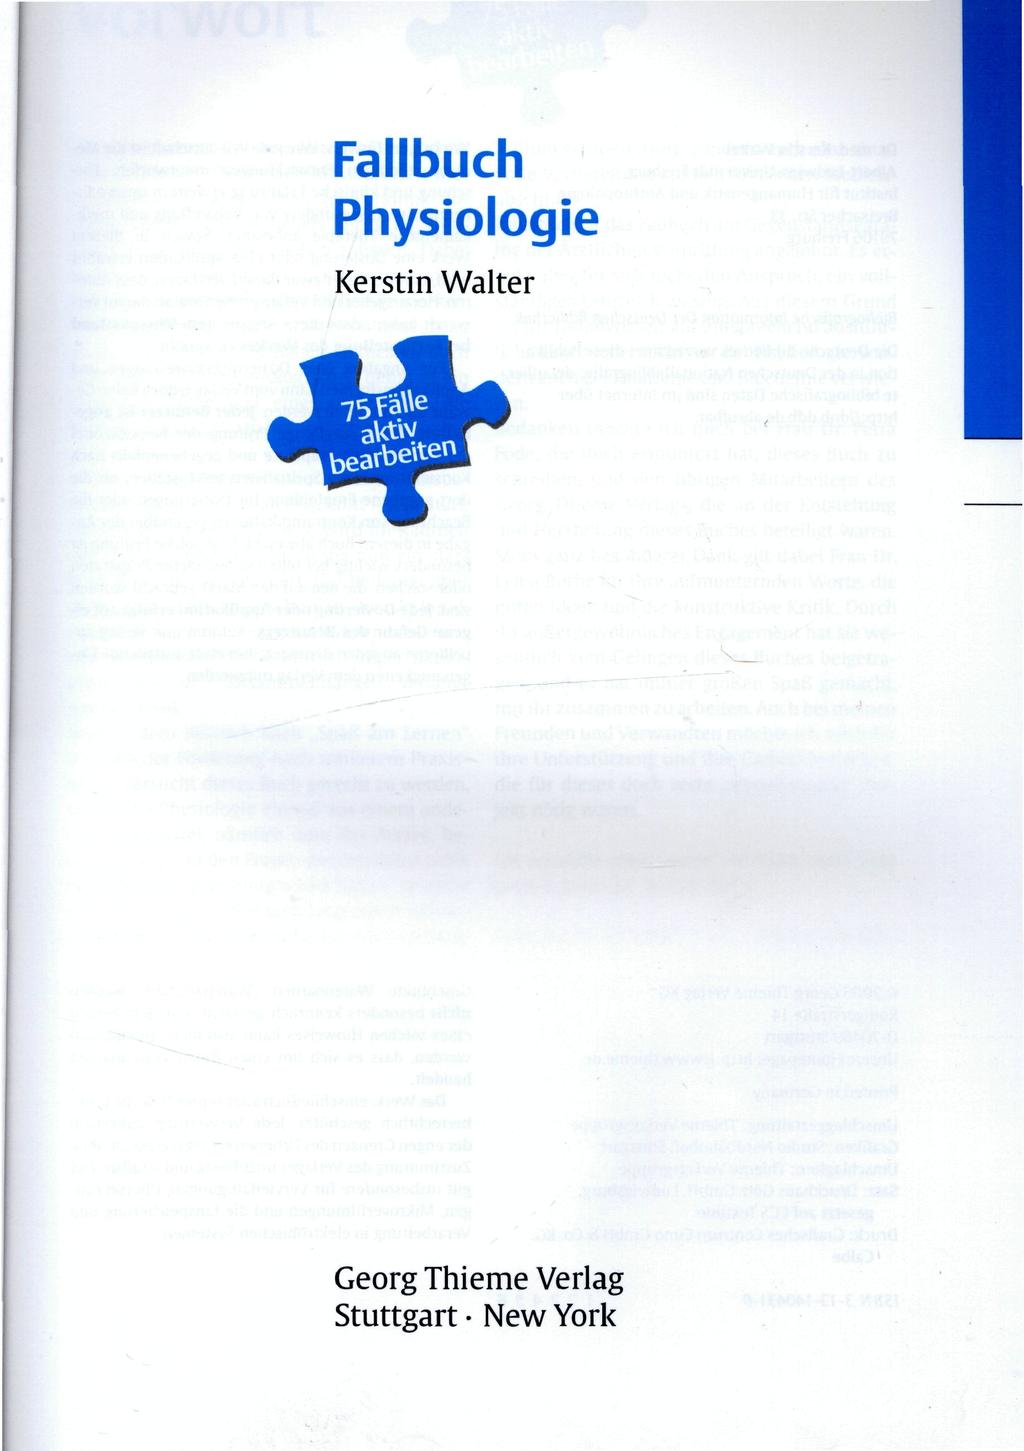 Fallbuch Physiologie Kerstin Walter 2008 AGI-Information Management Consultants May be used for personal